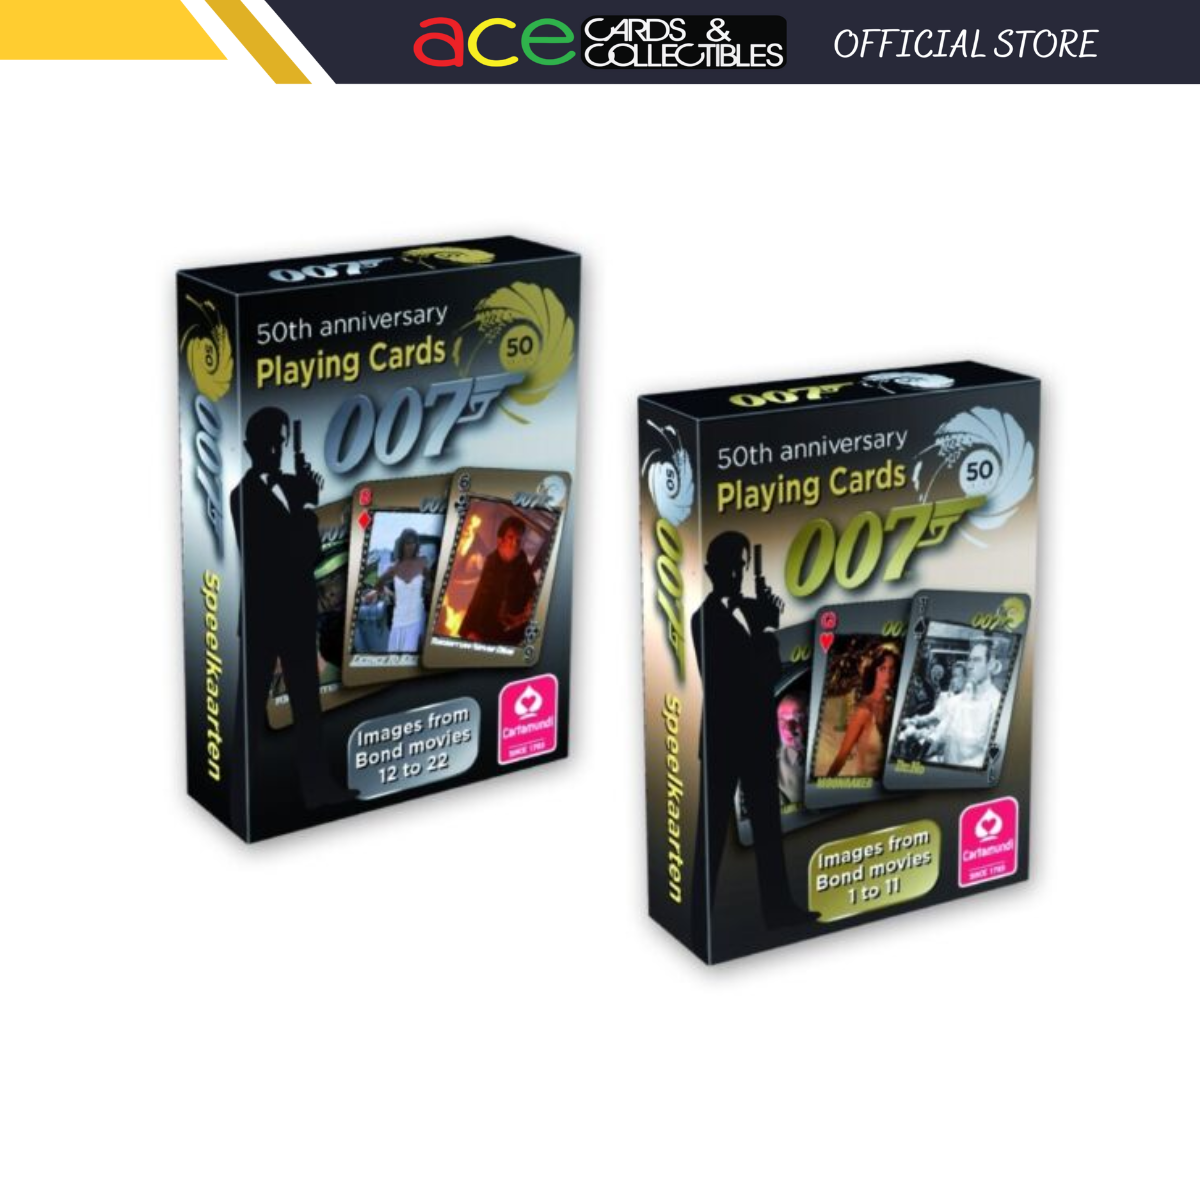 James Bond 50th Anniversary Playing Cards with Images from Bond Movies-Gold 1 To 11-Cartamundi-Ace Cards & Collectibles